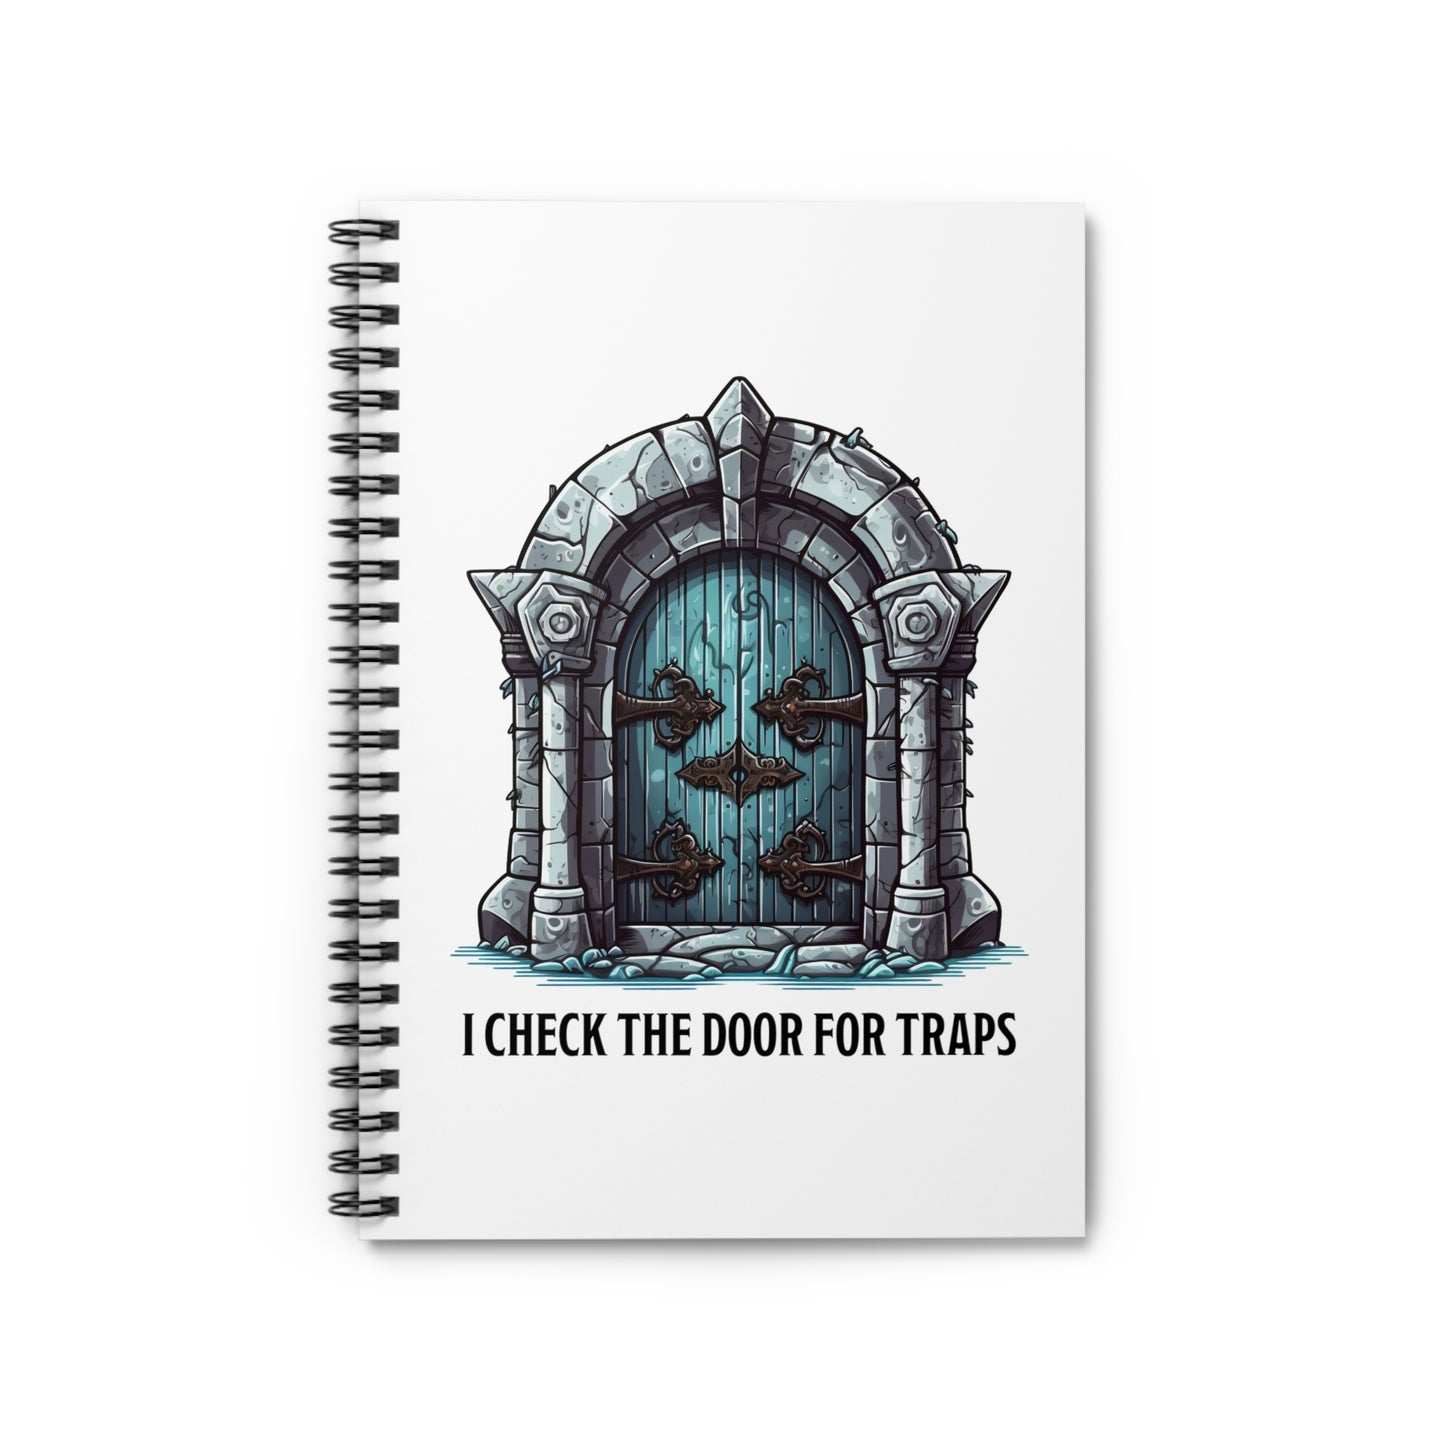 DnD Campaign Journal, I Check the Door for Traps Spiral Notebook, DnD Rogue Journal, D&D Character Notepad, Pathfinder Journal, Ruled Line